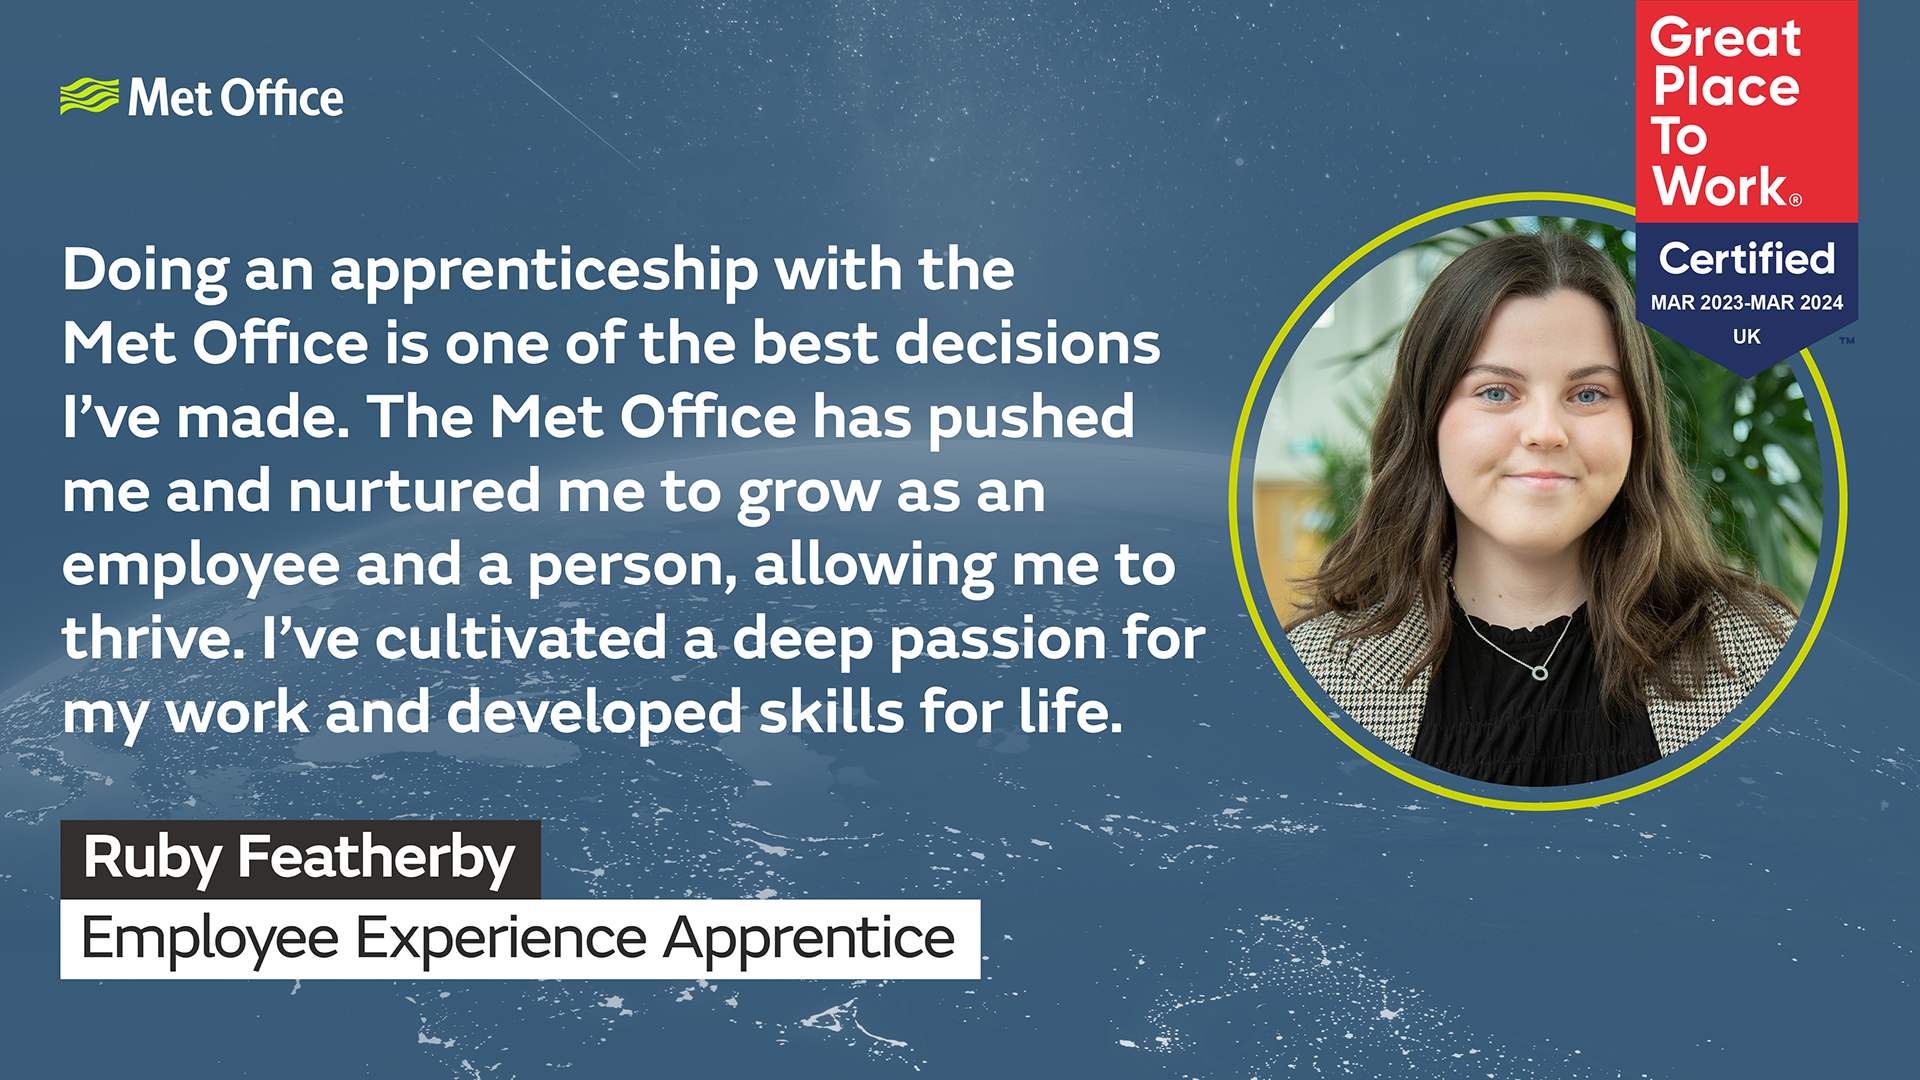 Graphic showing a quote from Ruby Featherby about her experience of doing an apprenticeship with the Met Office, accompanied by a head and shoulders photo